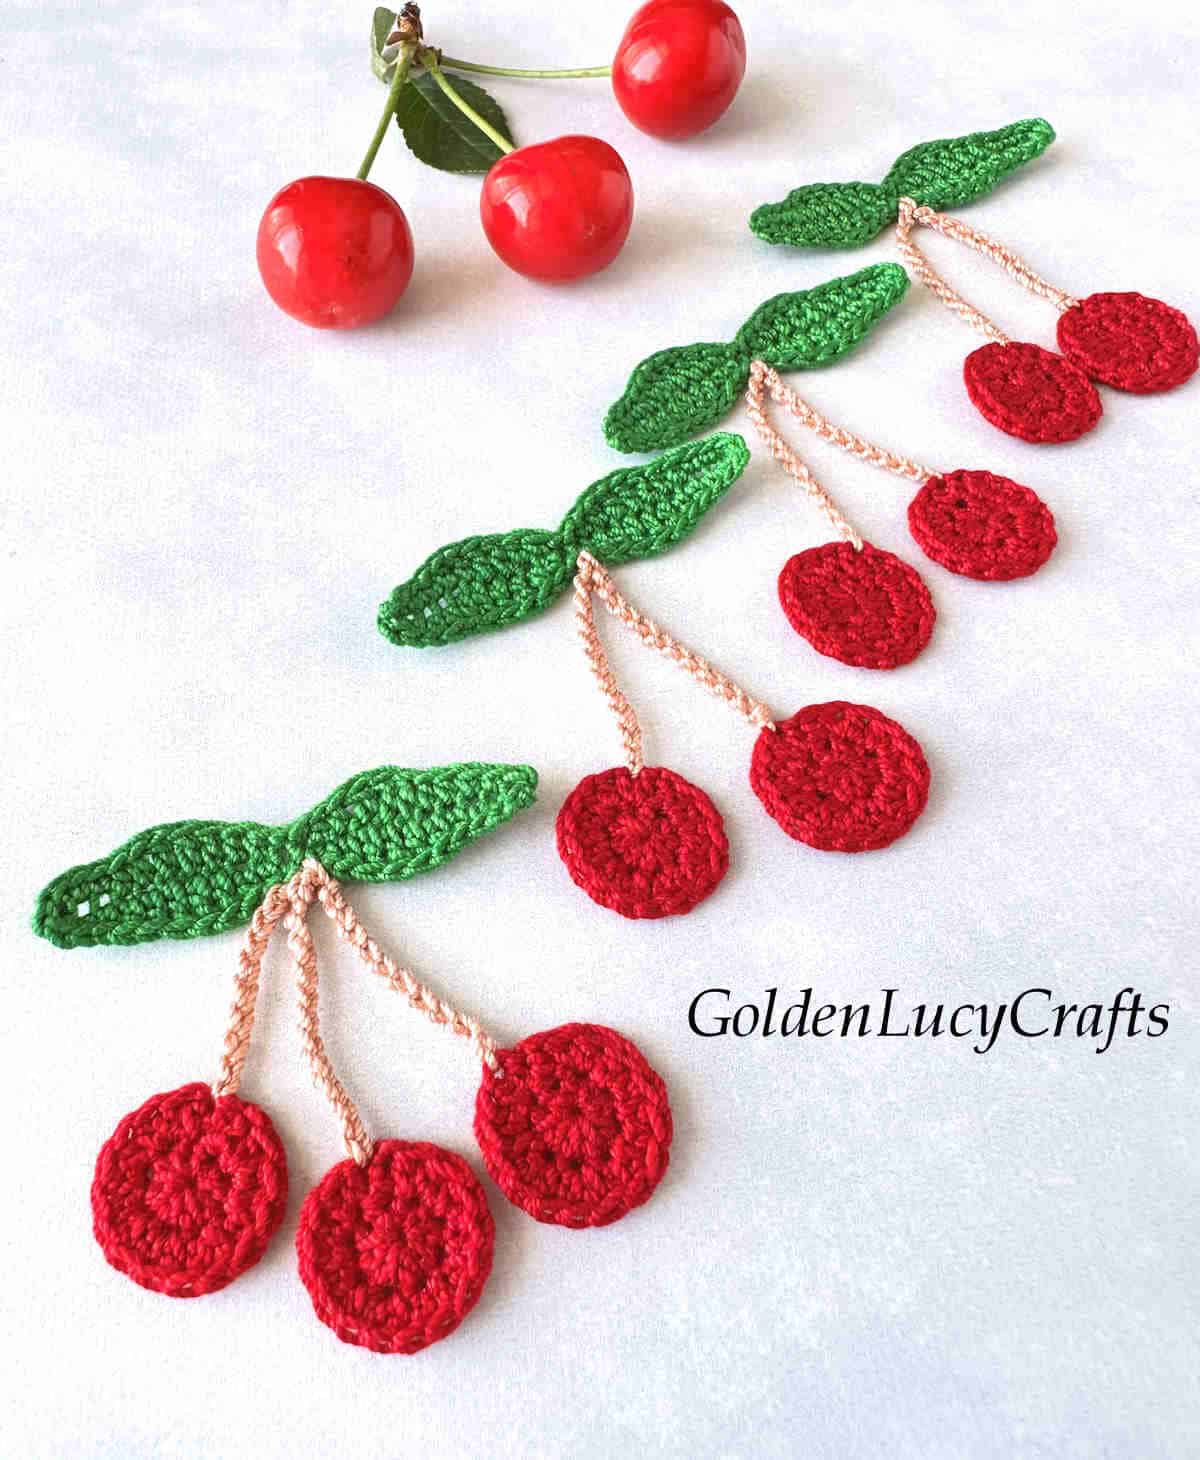 Crocheted cherry appliques.